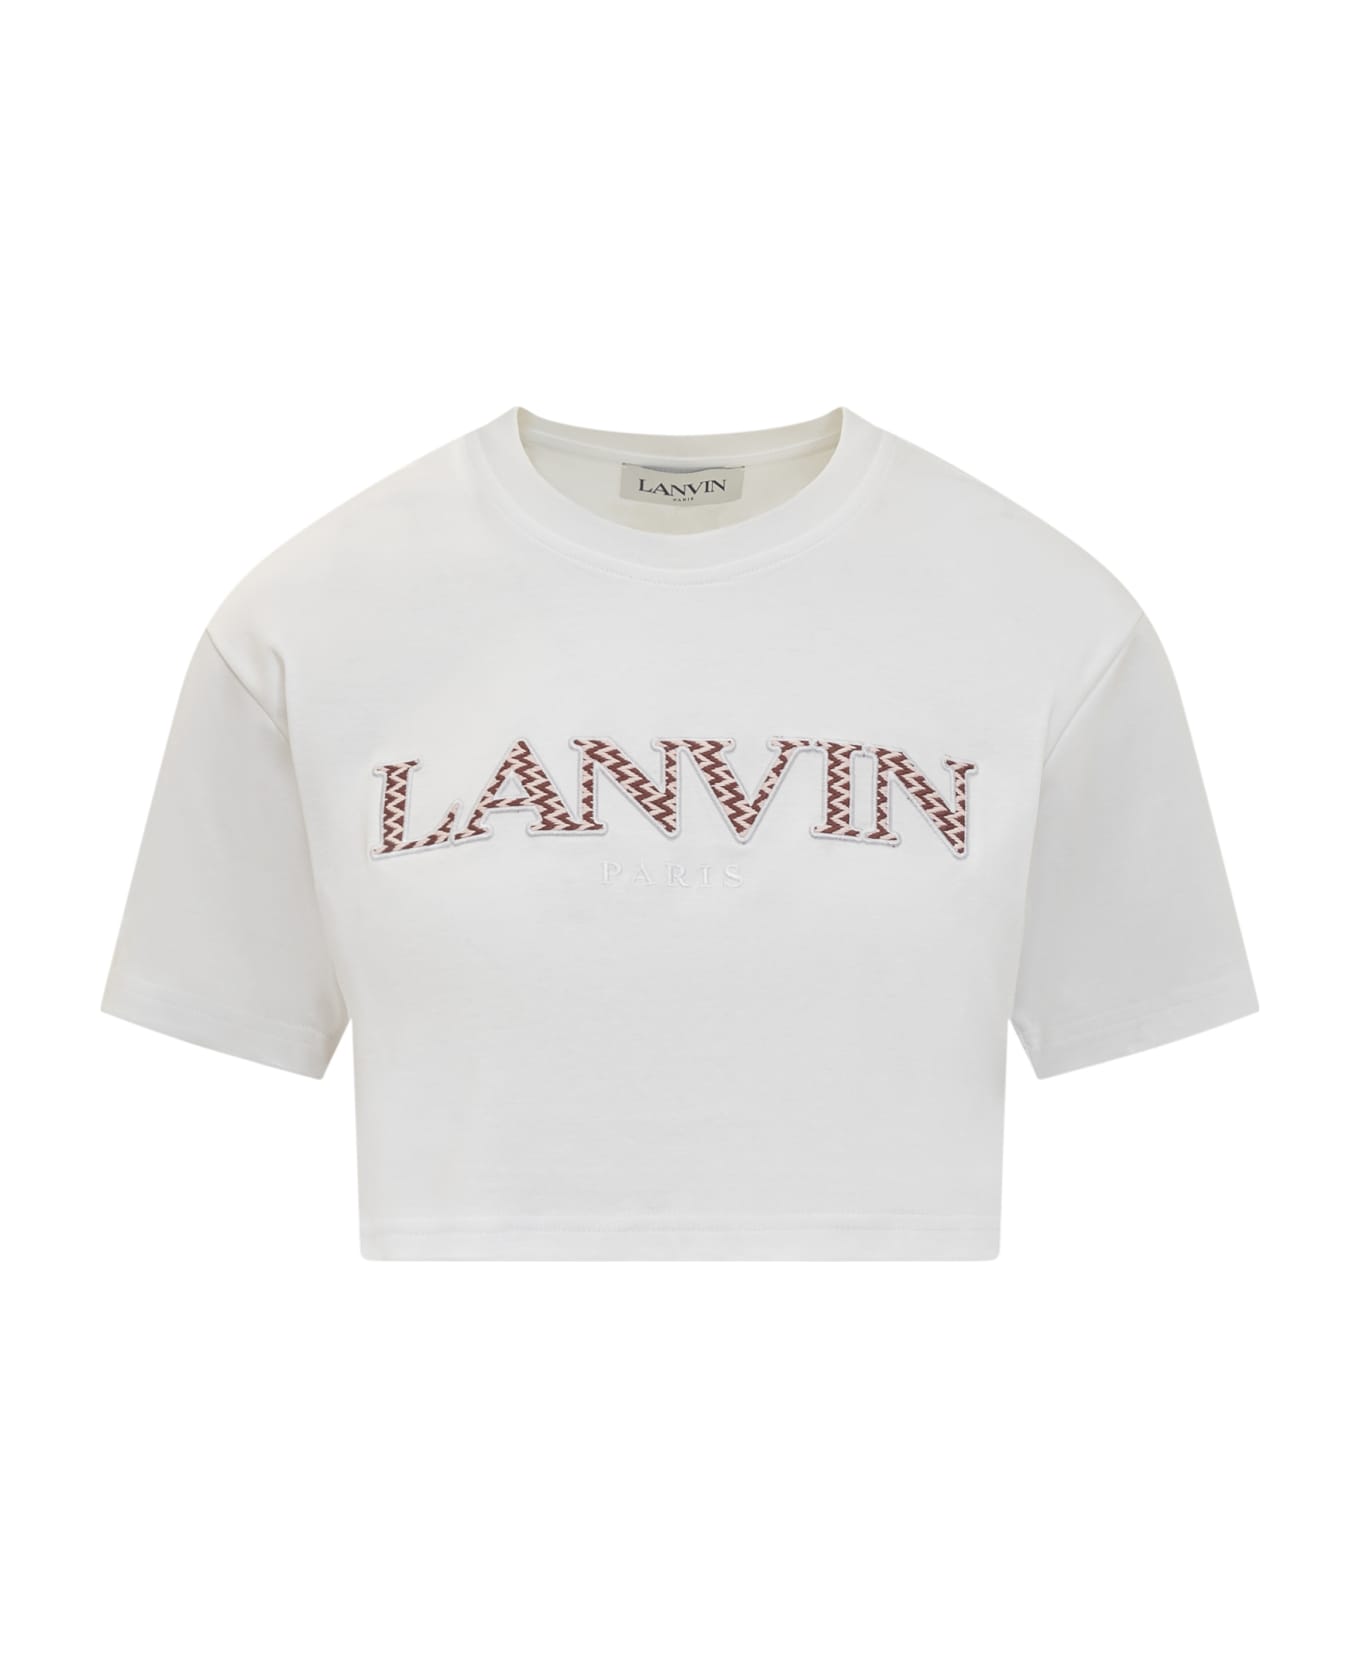 Lanvin Cropped Curb T-shirt - Optic White Tシャツ